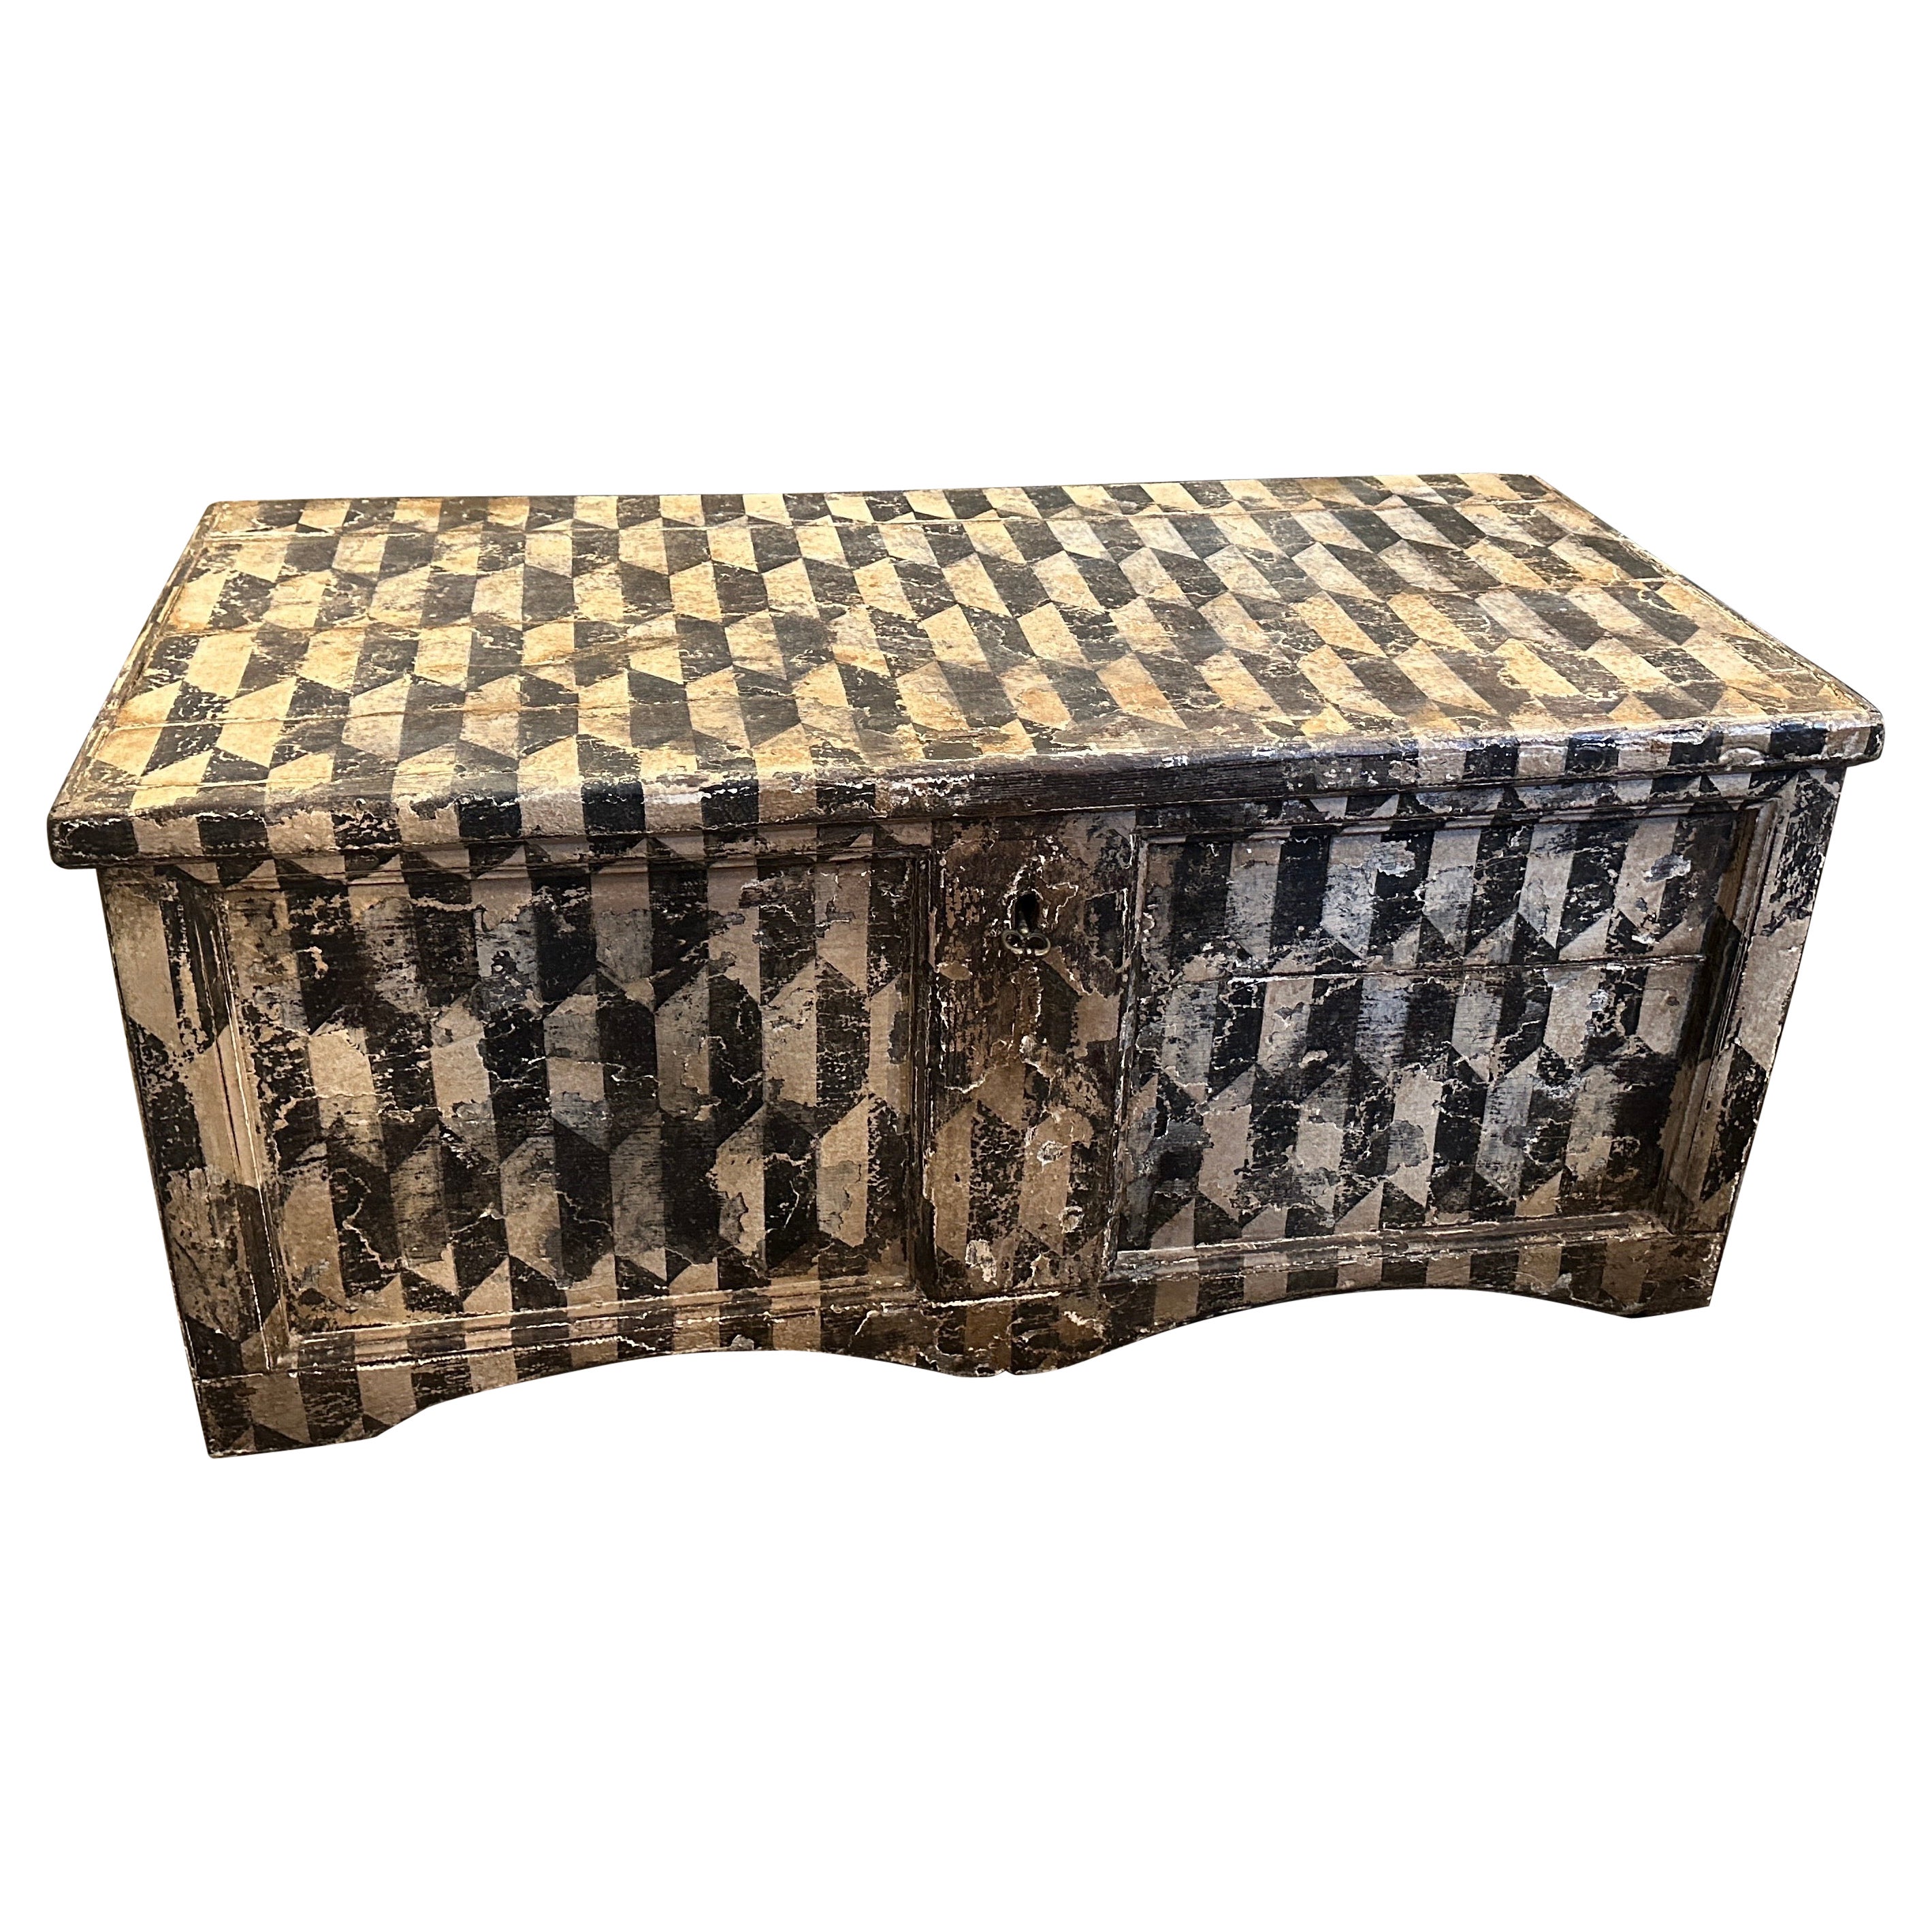 Late 19th Century Black and White Lacquered Wood Florentine Blanket Chest